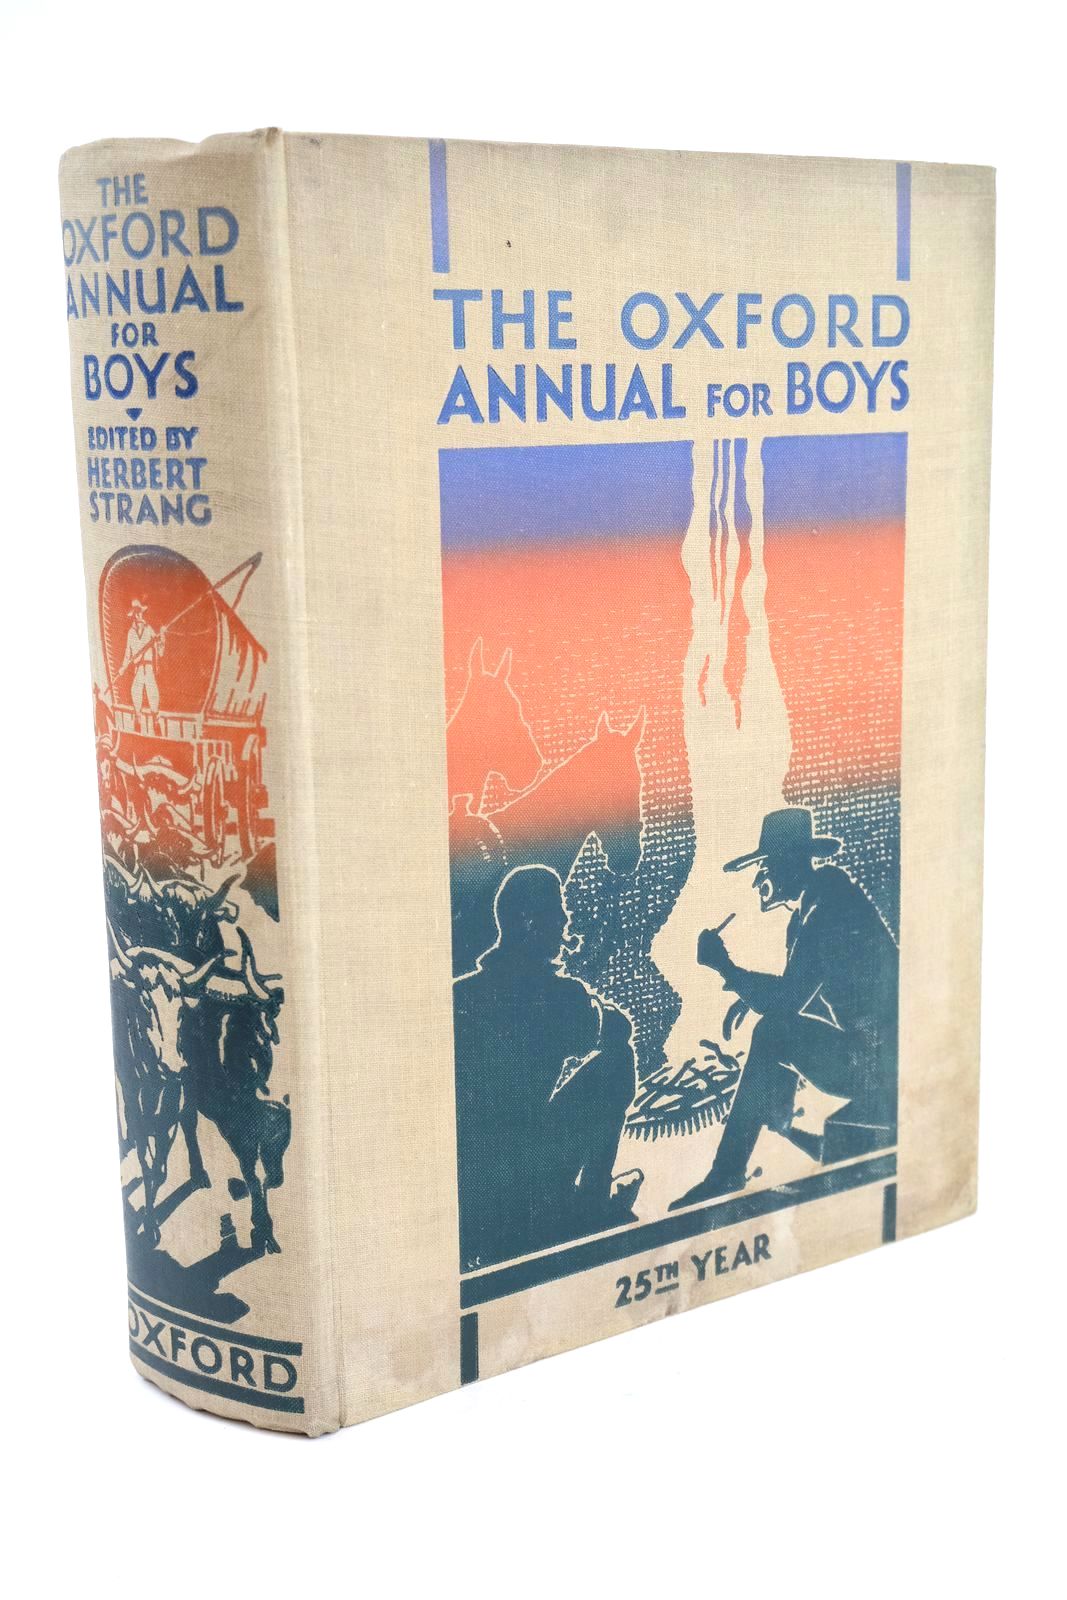 Photo of THE OXFORD ANNUAL FOR BOYS 25TH YEAR written by Strang, Herbert Owen, A. Lloyd Havilton, Jeffrey Gilson, Major Charles et al, illustrated by Hilder, Rowland Leigh, Conrad H. et al., published by Oxford University Press, Humphrey Milford (STOCK CODE: 1324834)  for sale by Stella & Rose's Books